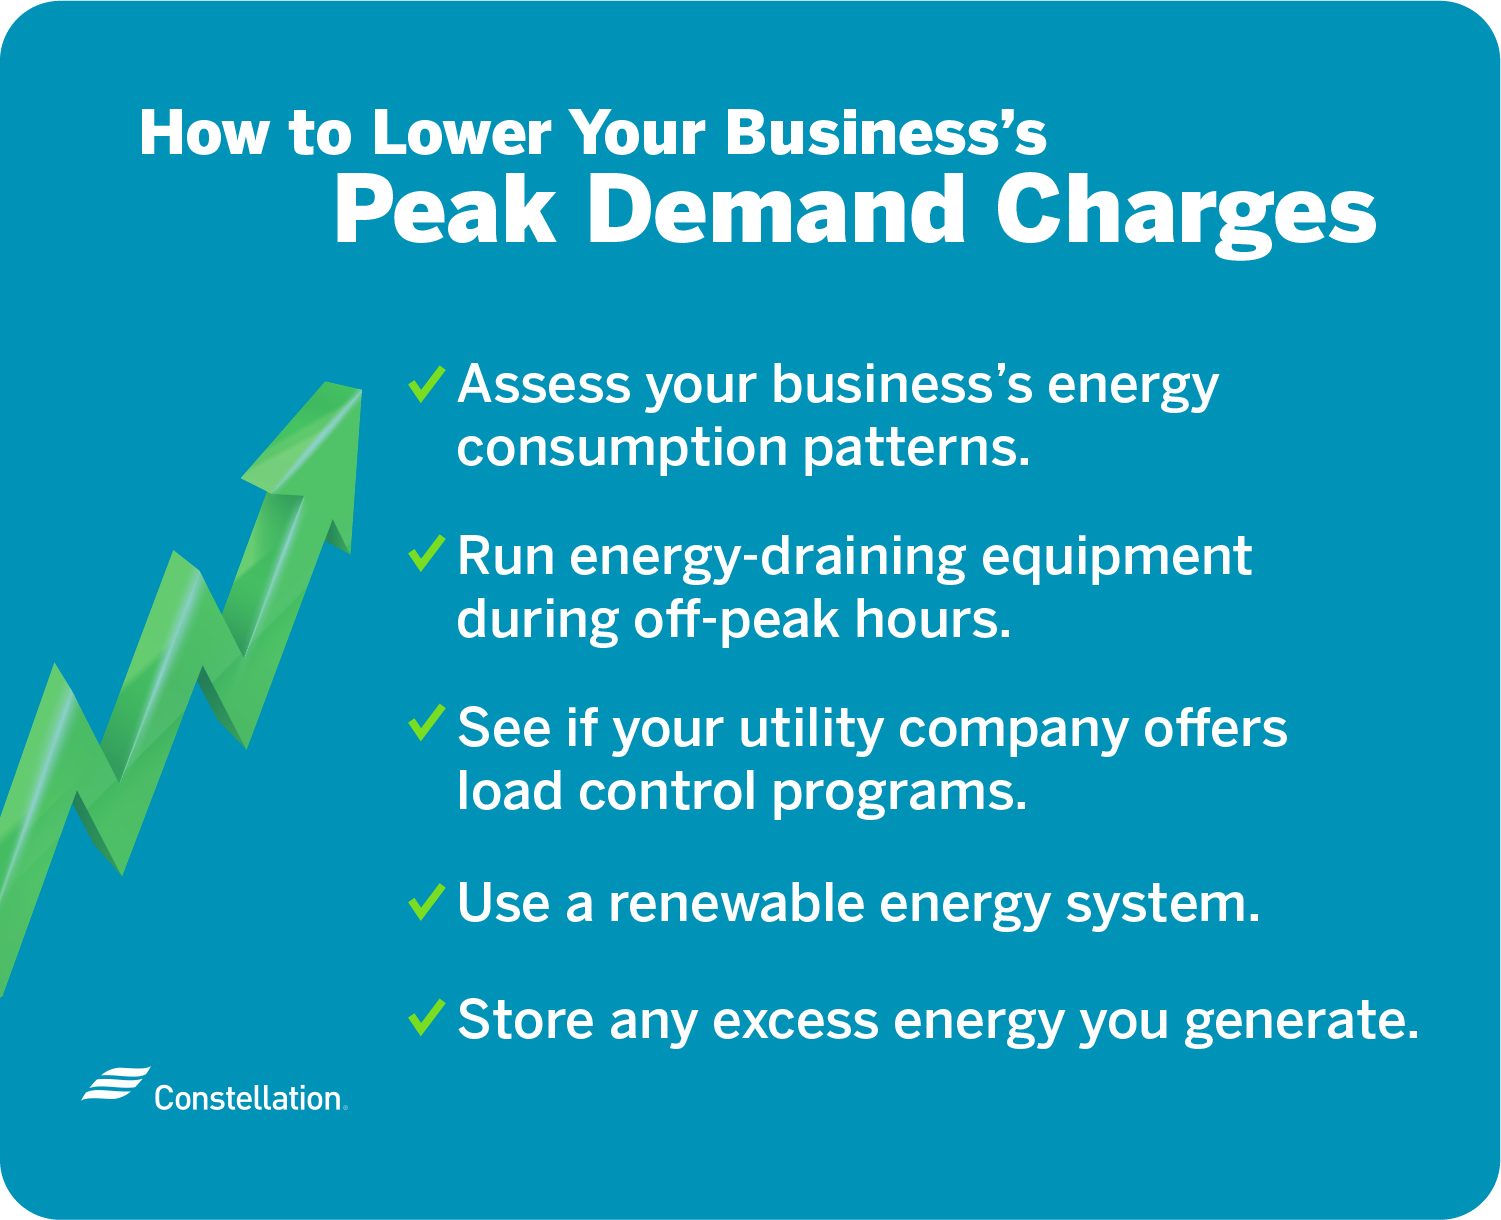 How to lower your business's peak demand charges